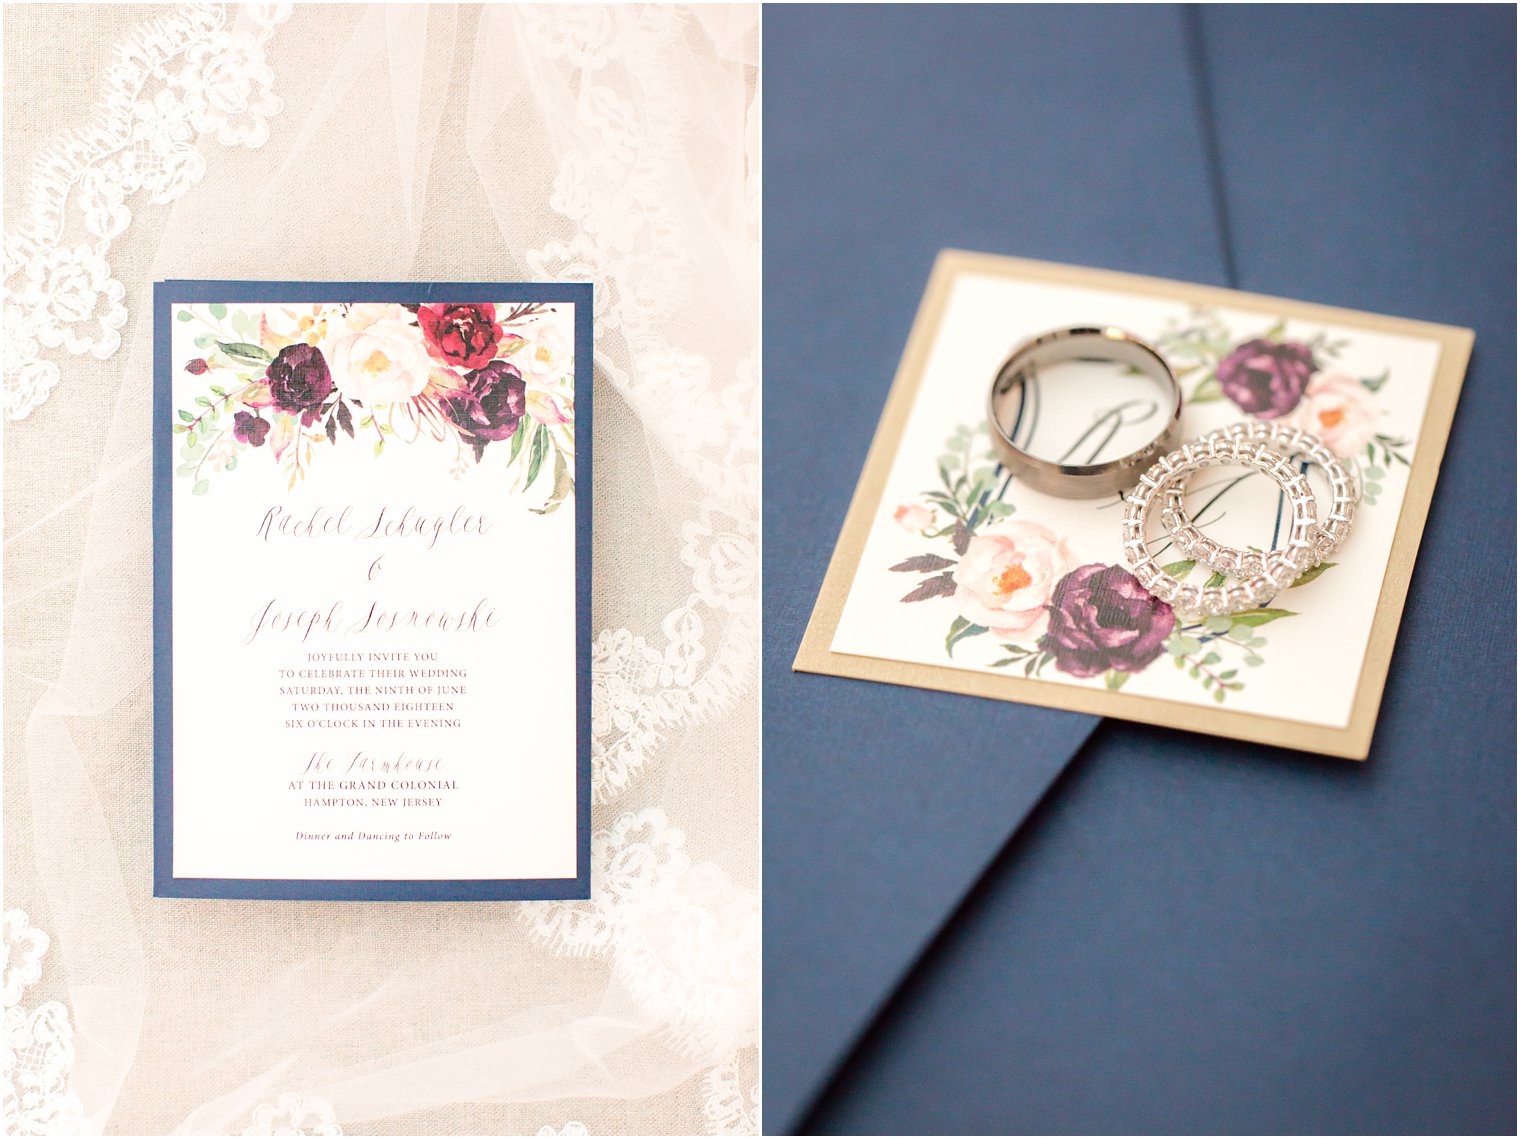 Wedding invitations by Lace and Belle